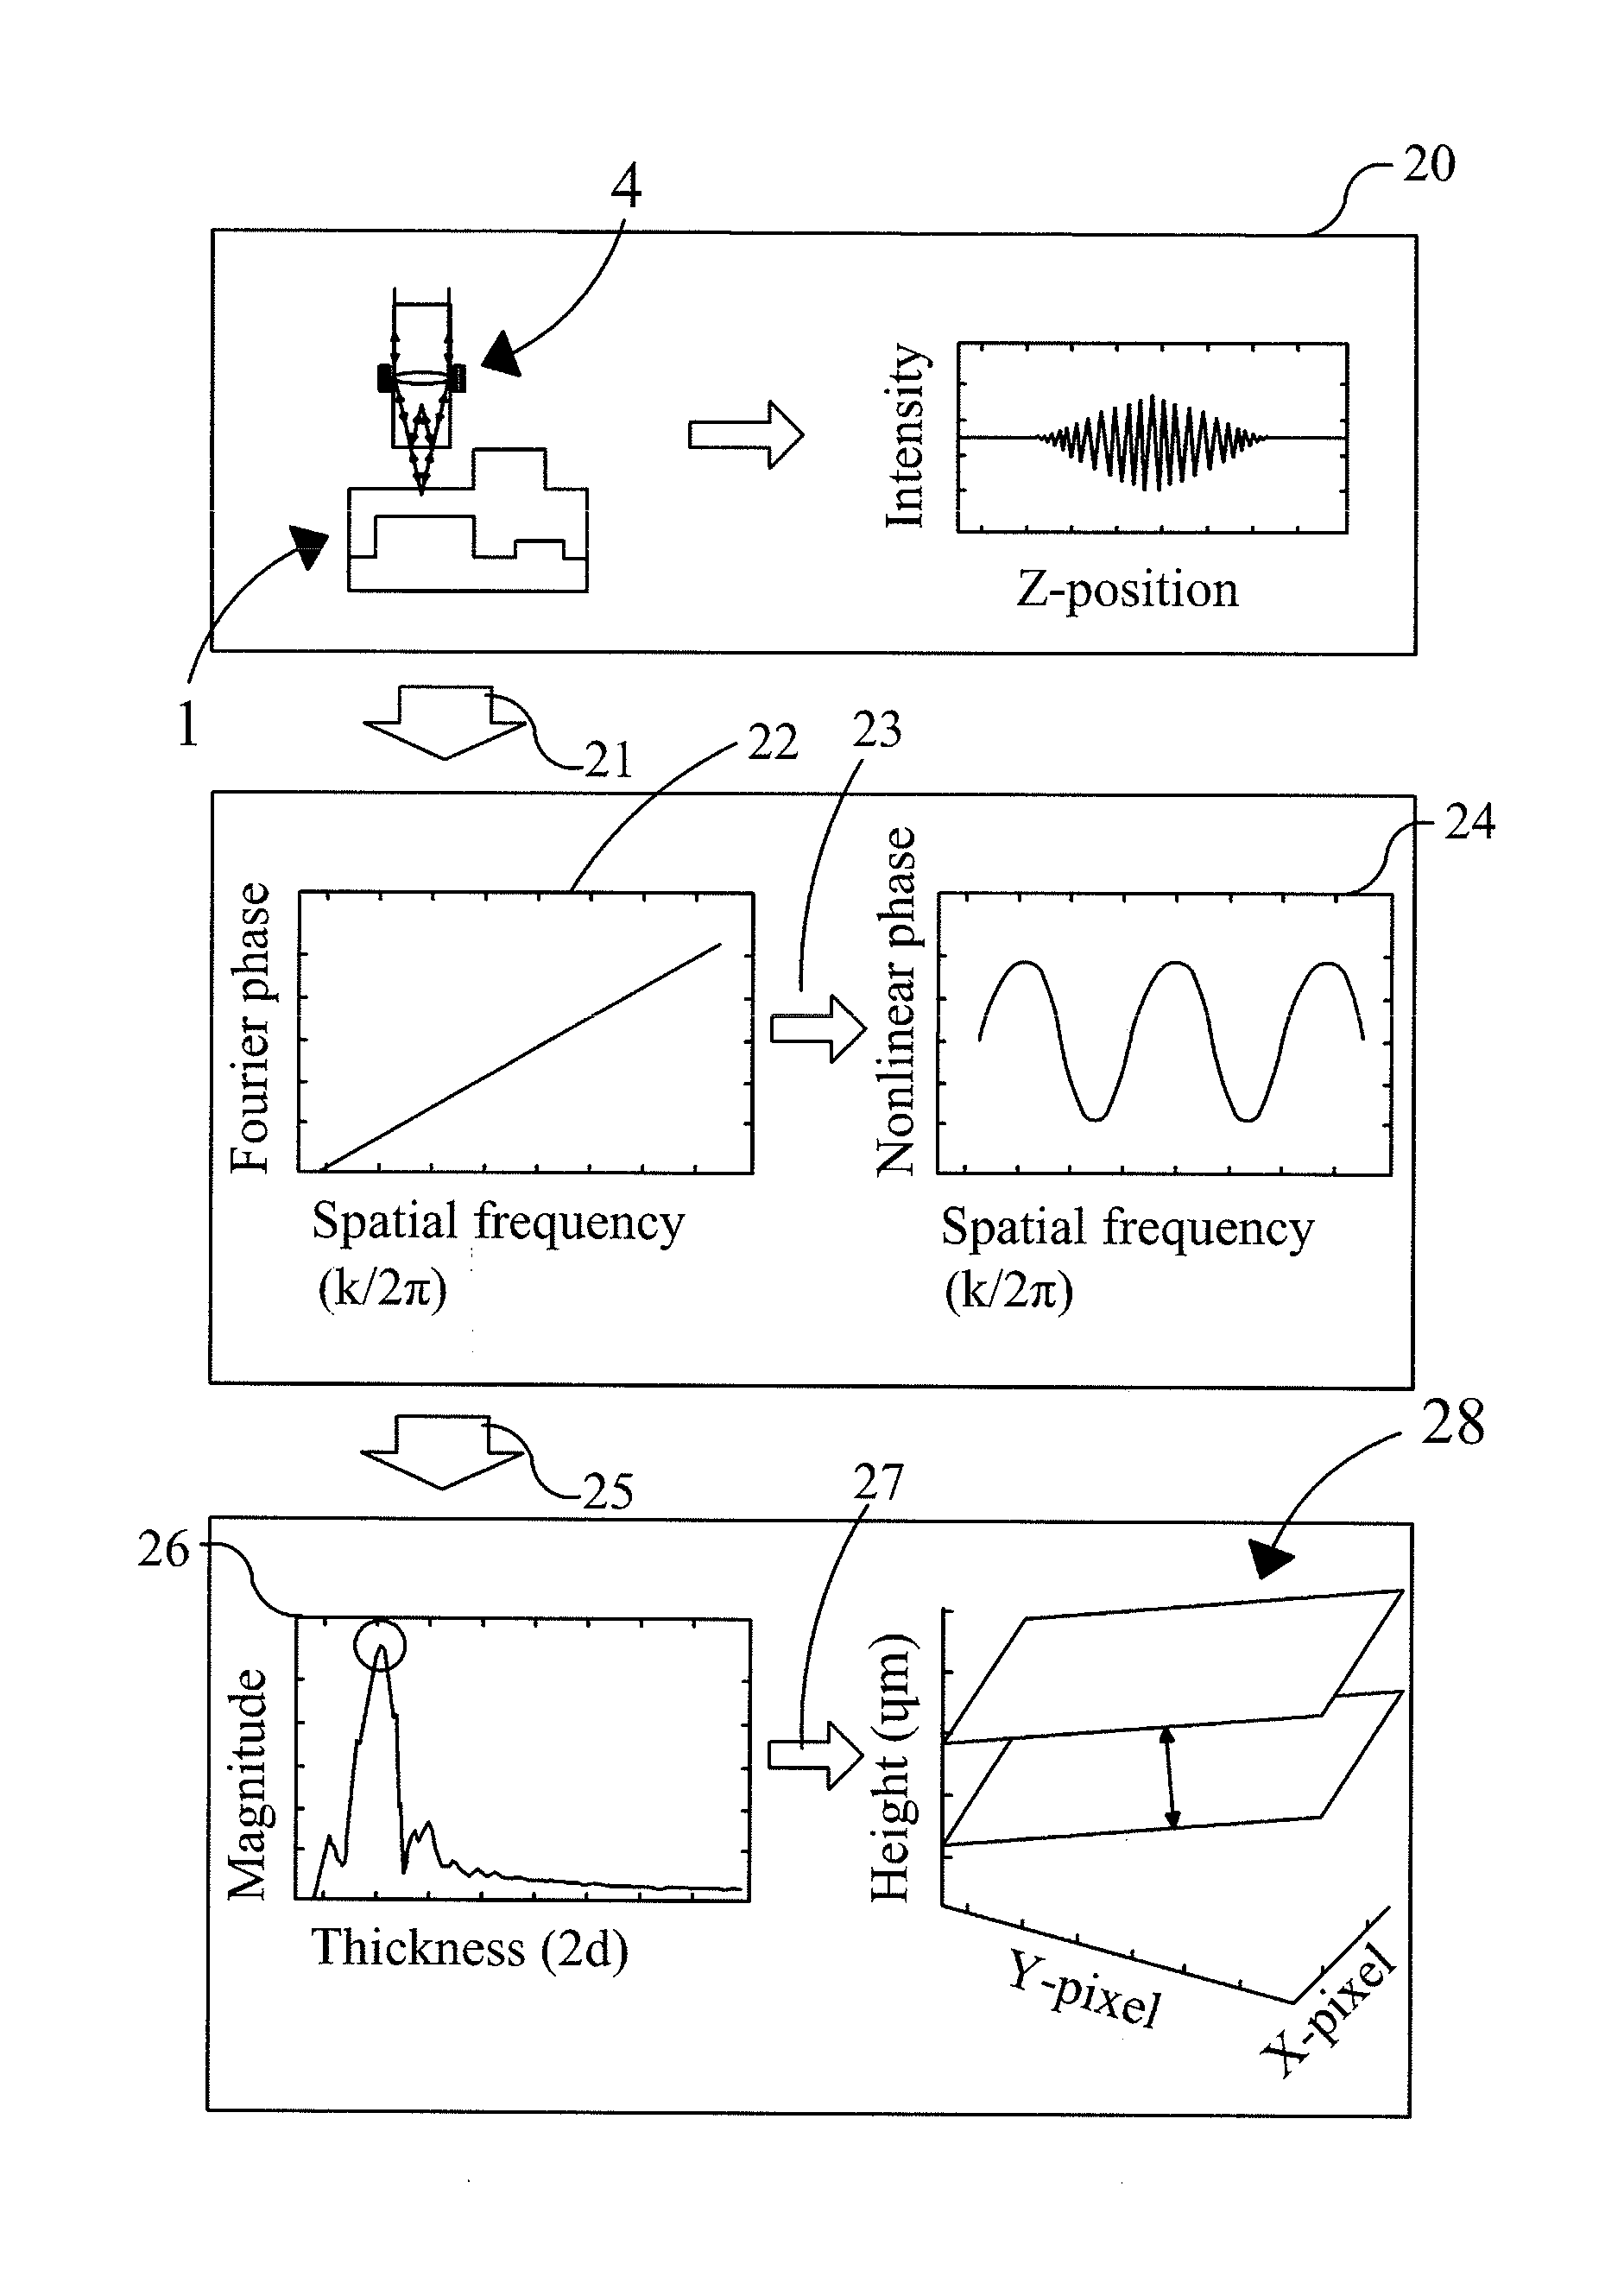 Method and apparatus for performing film thickness measurements using white light scanning interferometry